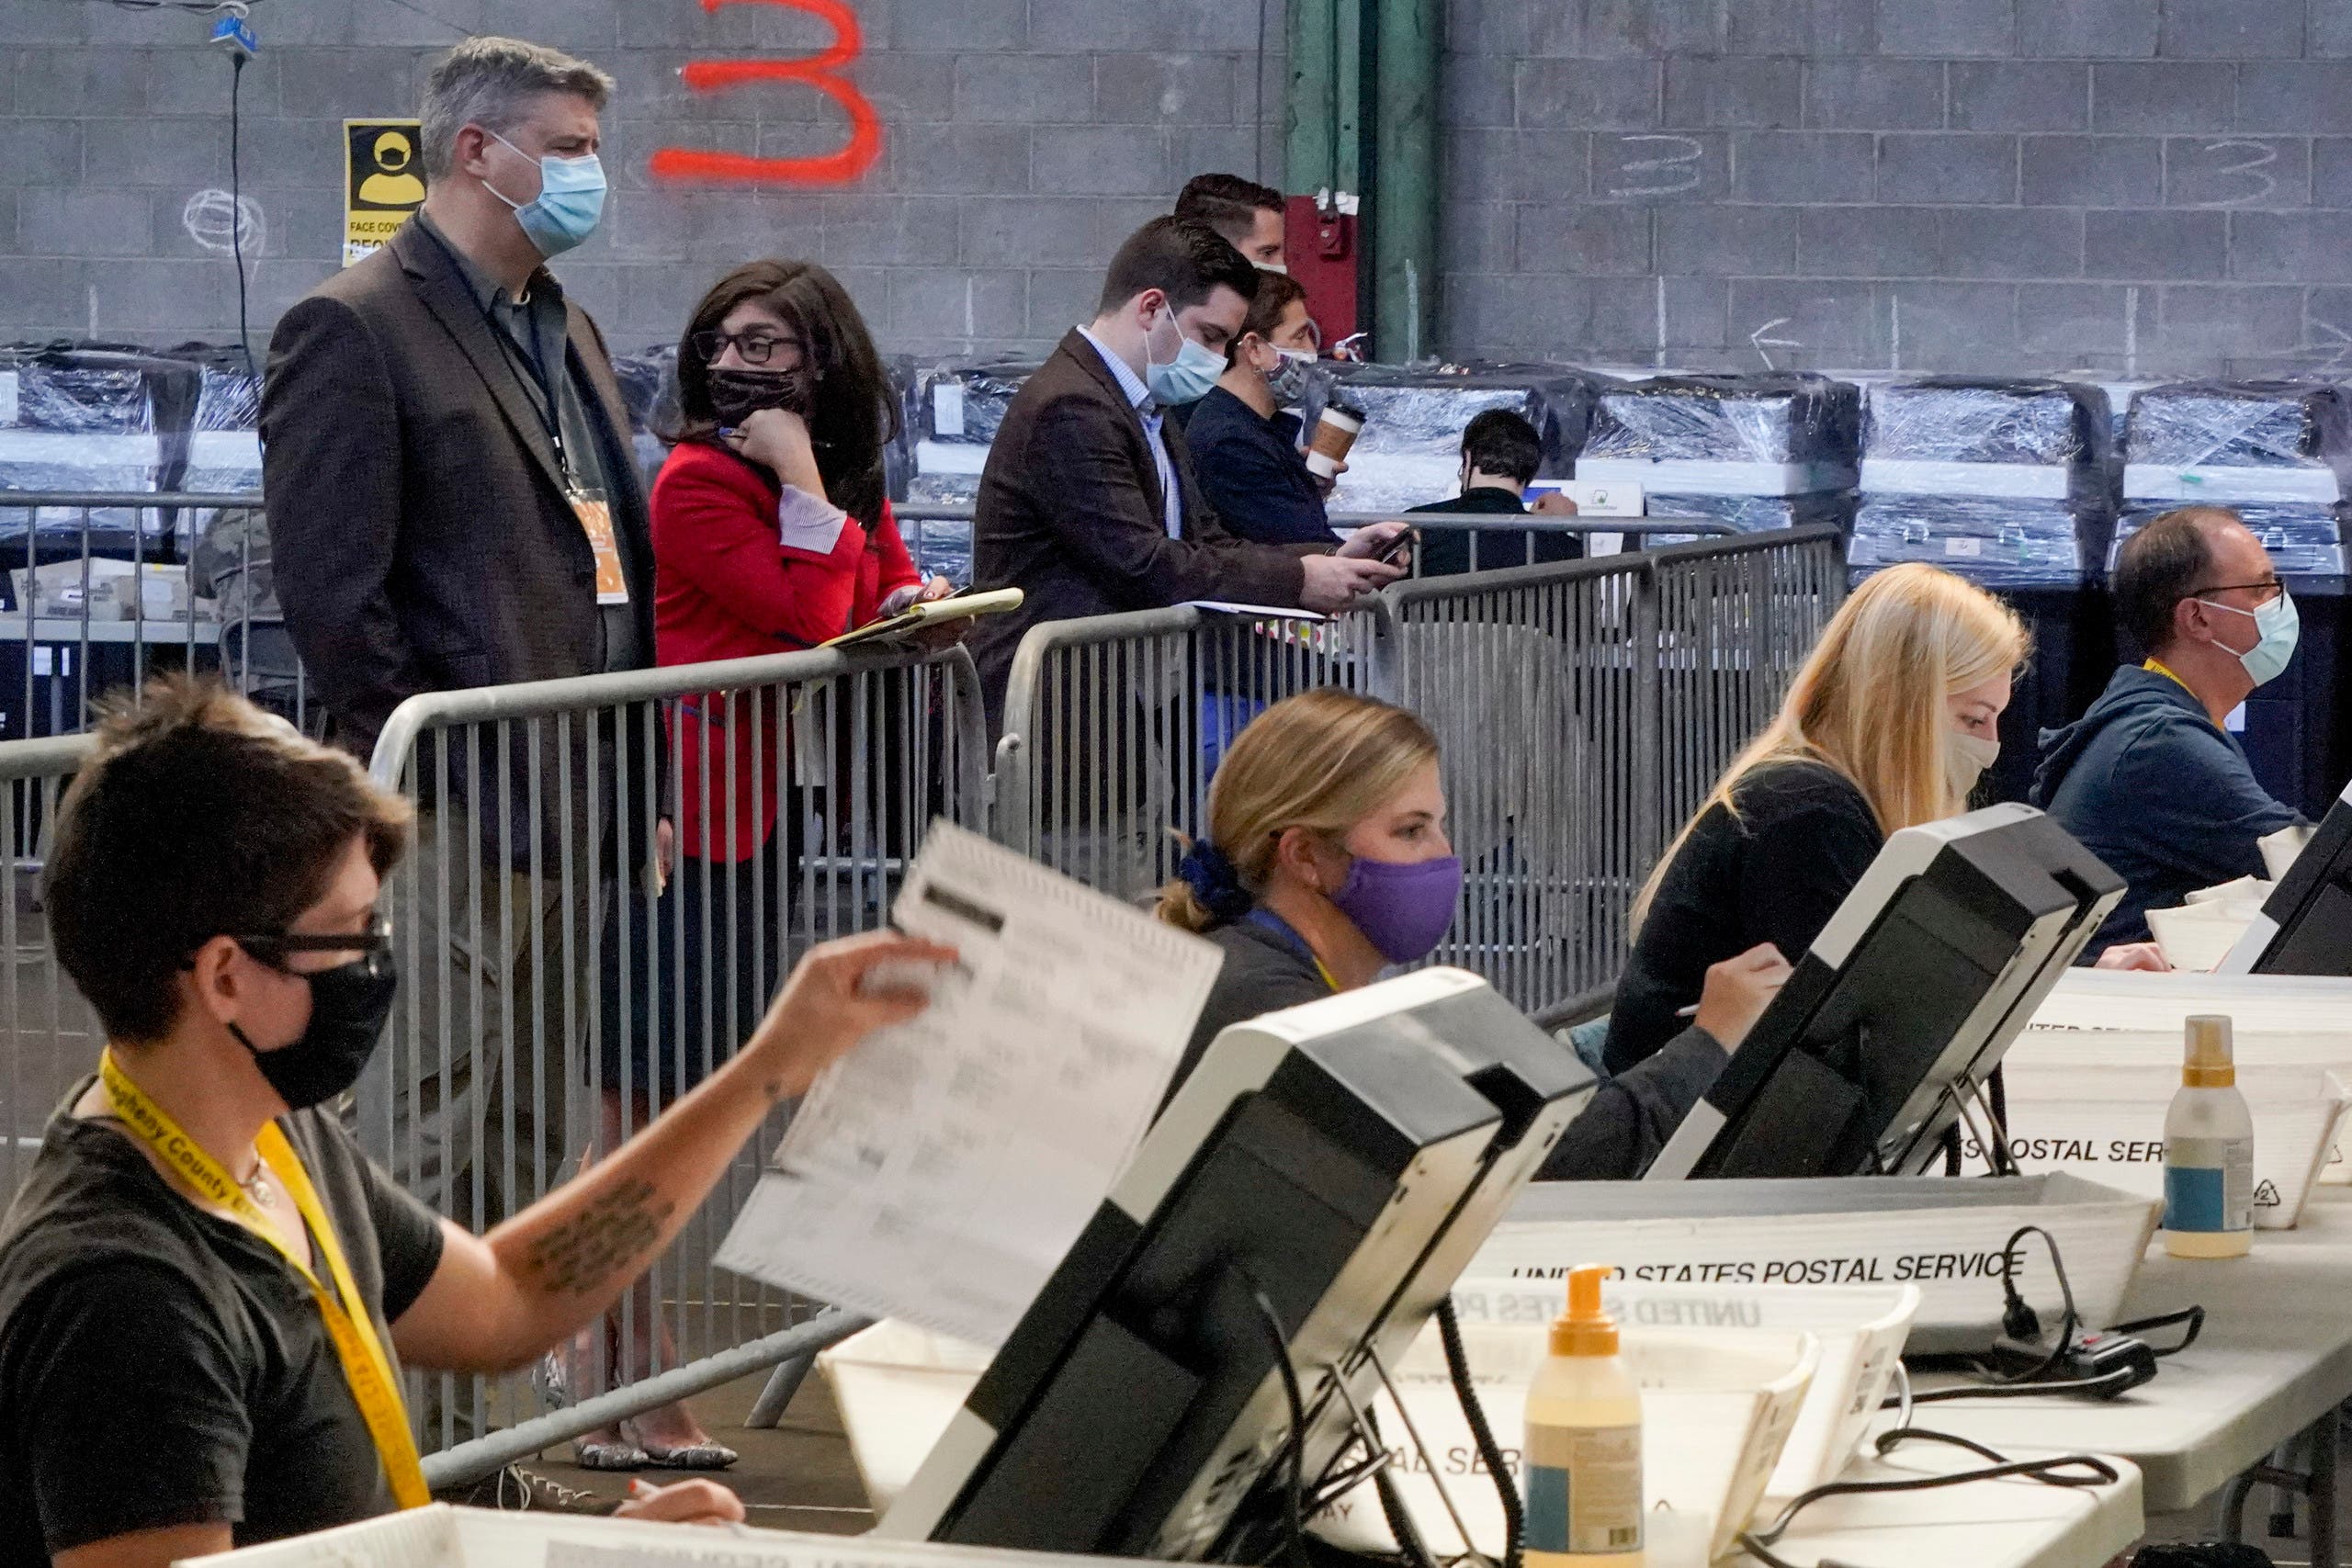 Election observers stand behind a barrier and watch as election office workers process ballots as counting continues from the general election at the Allegheny County elections returns warehouse in Pittsburgh on Nov. 6, 2020. (AP)